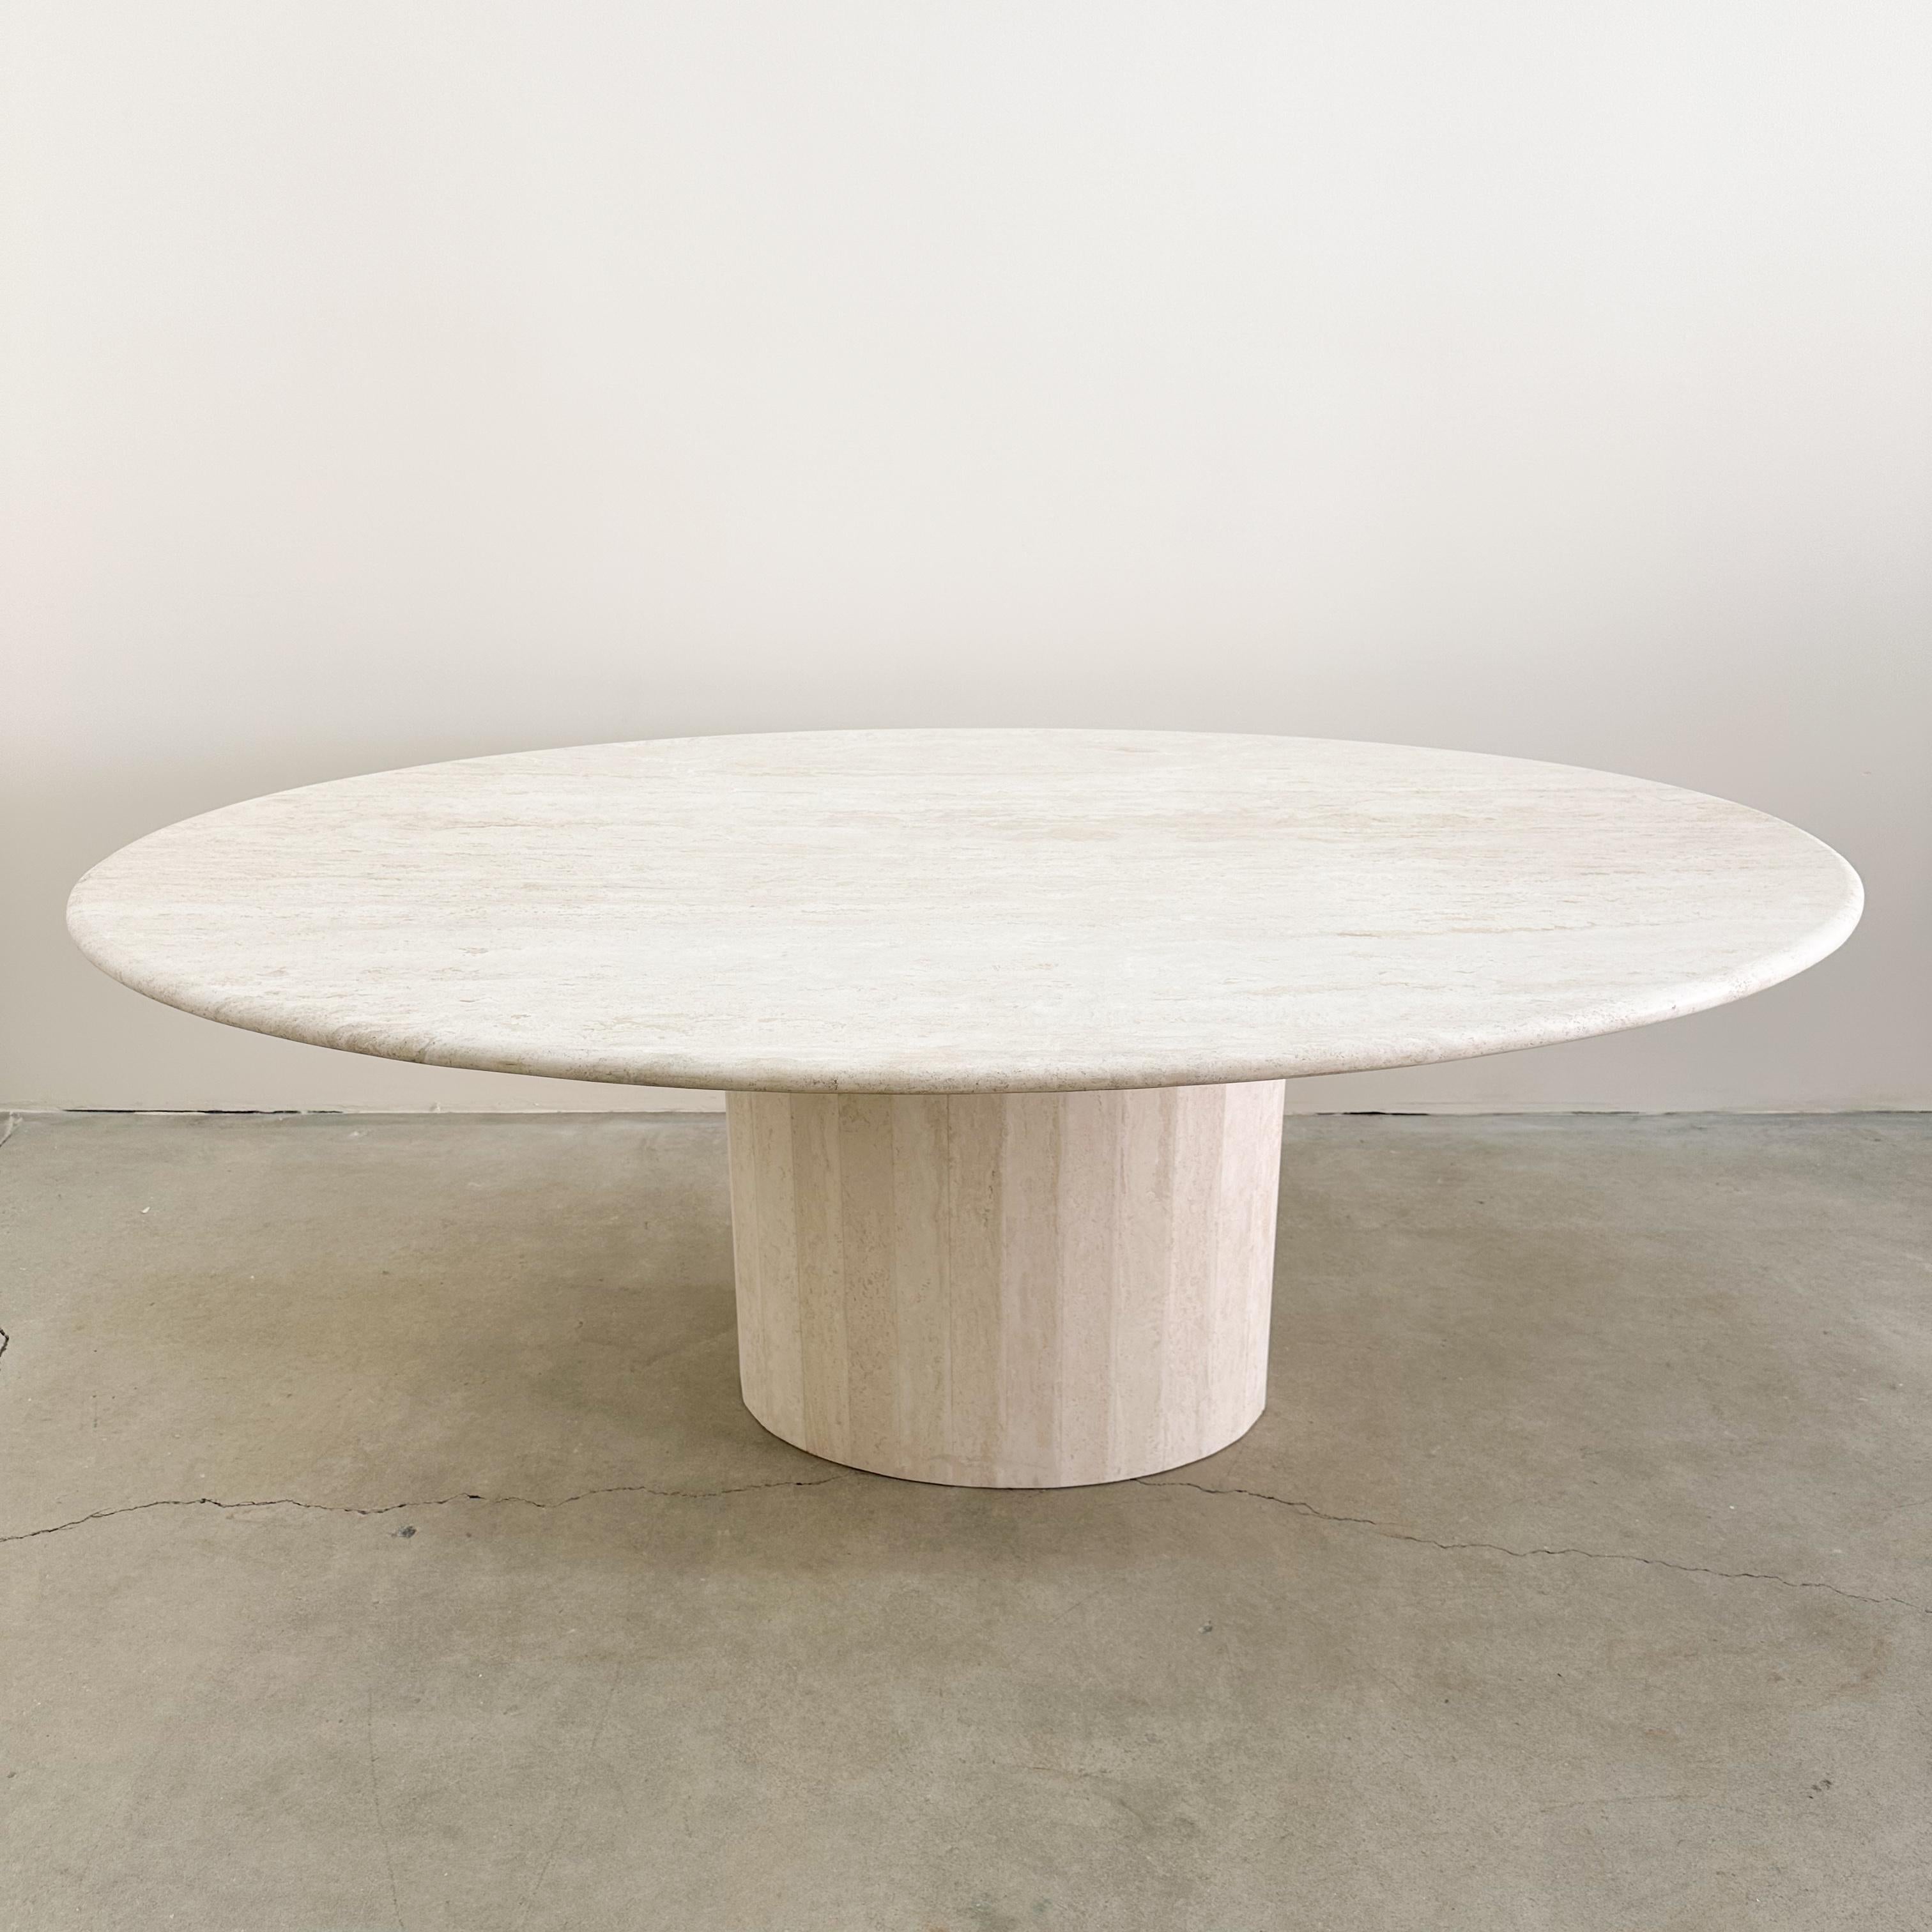 Vintage Travertine Stone Oval Dining Table  In Good Condition For Sale In Palm Desert, CA